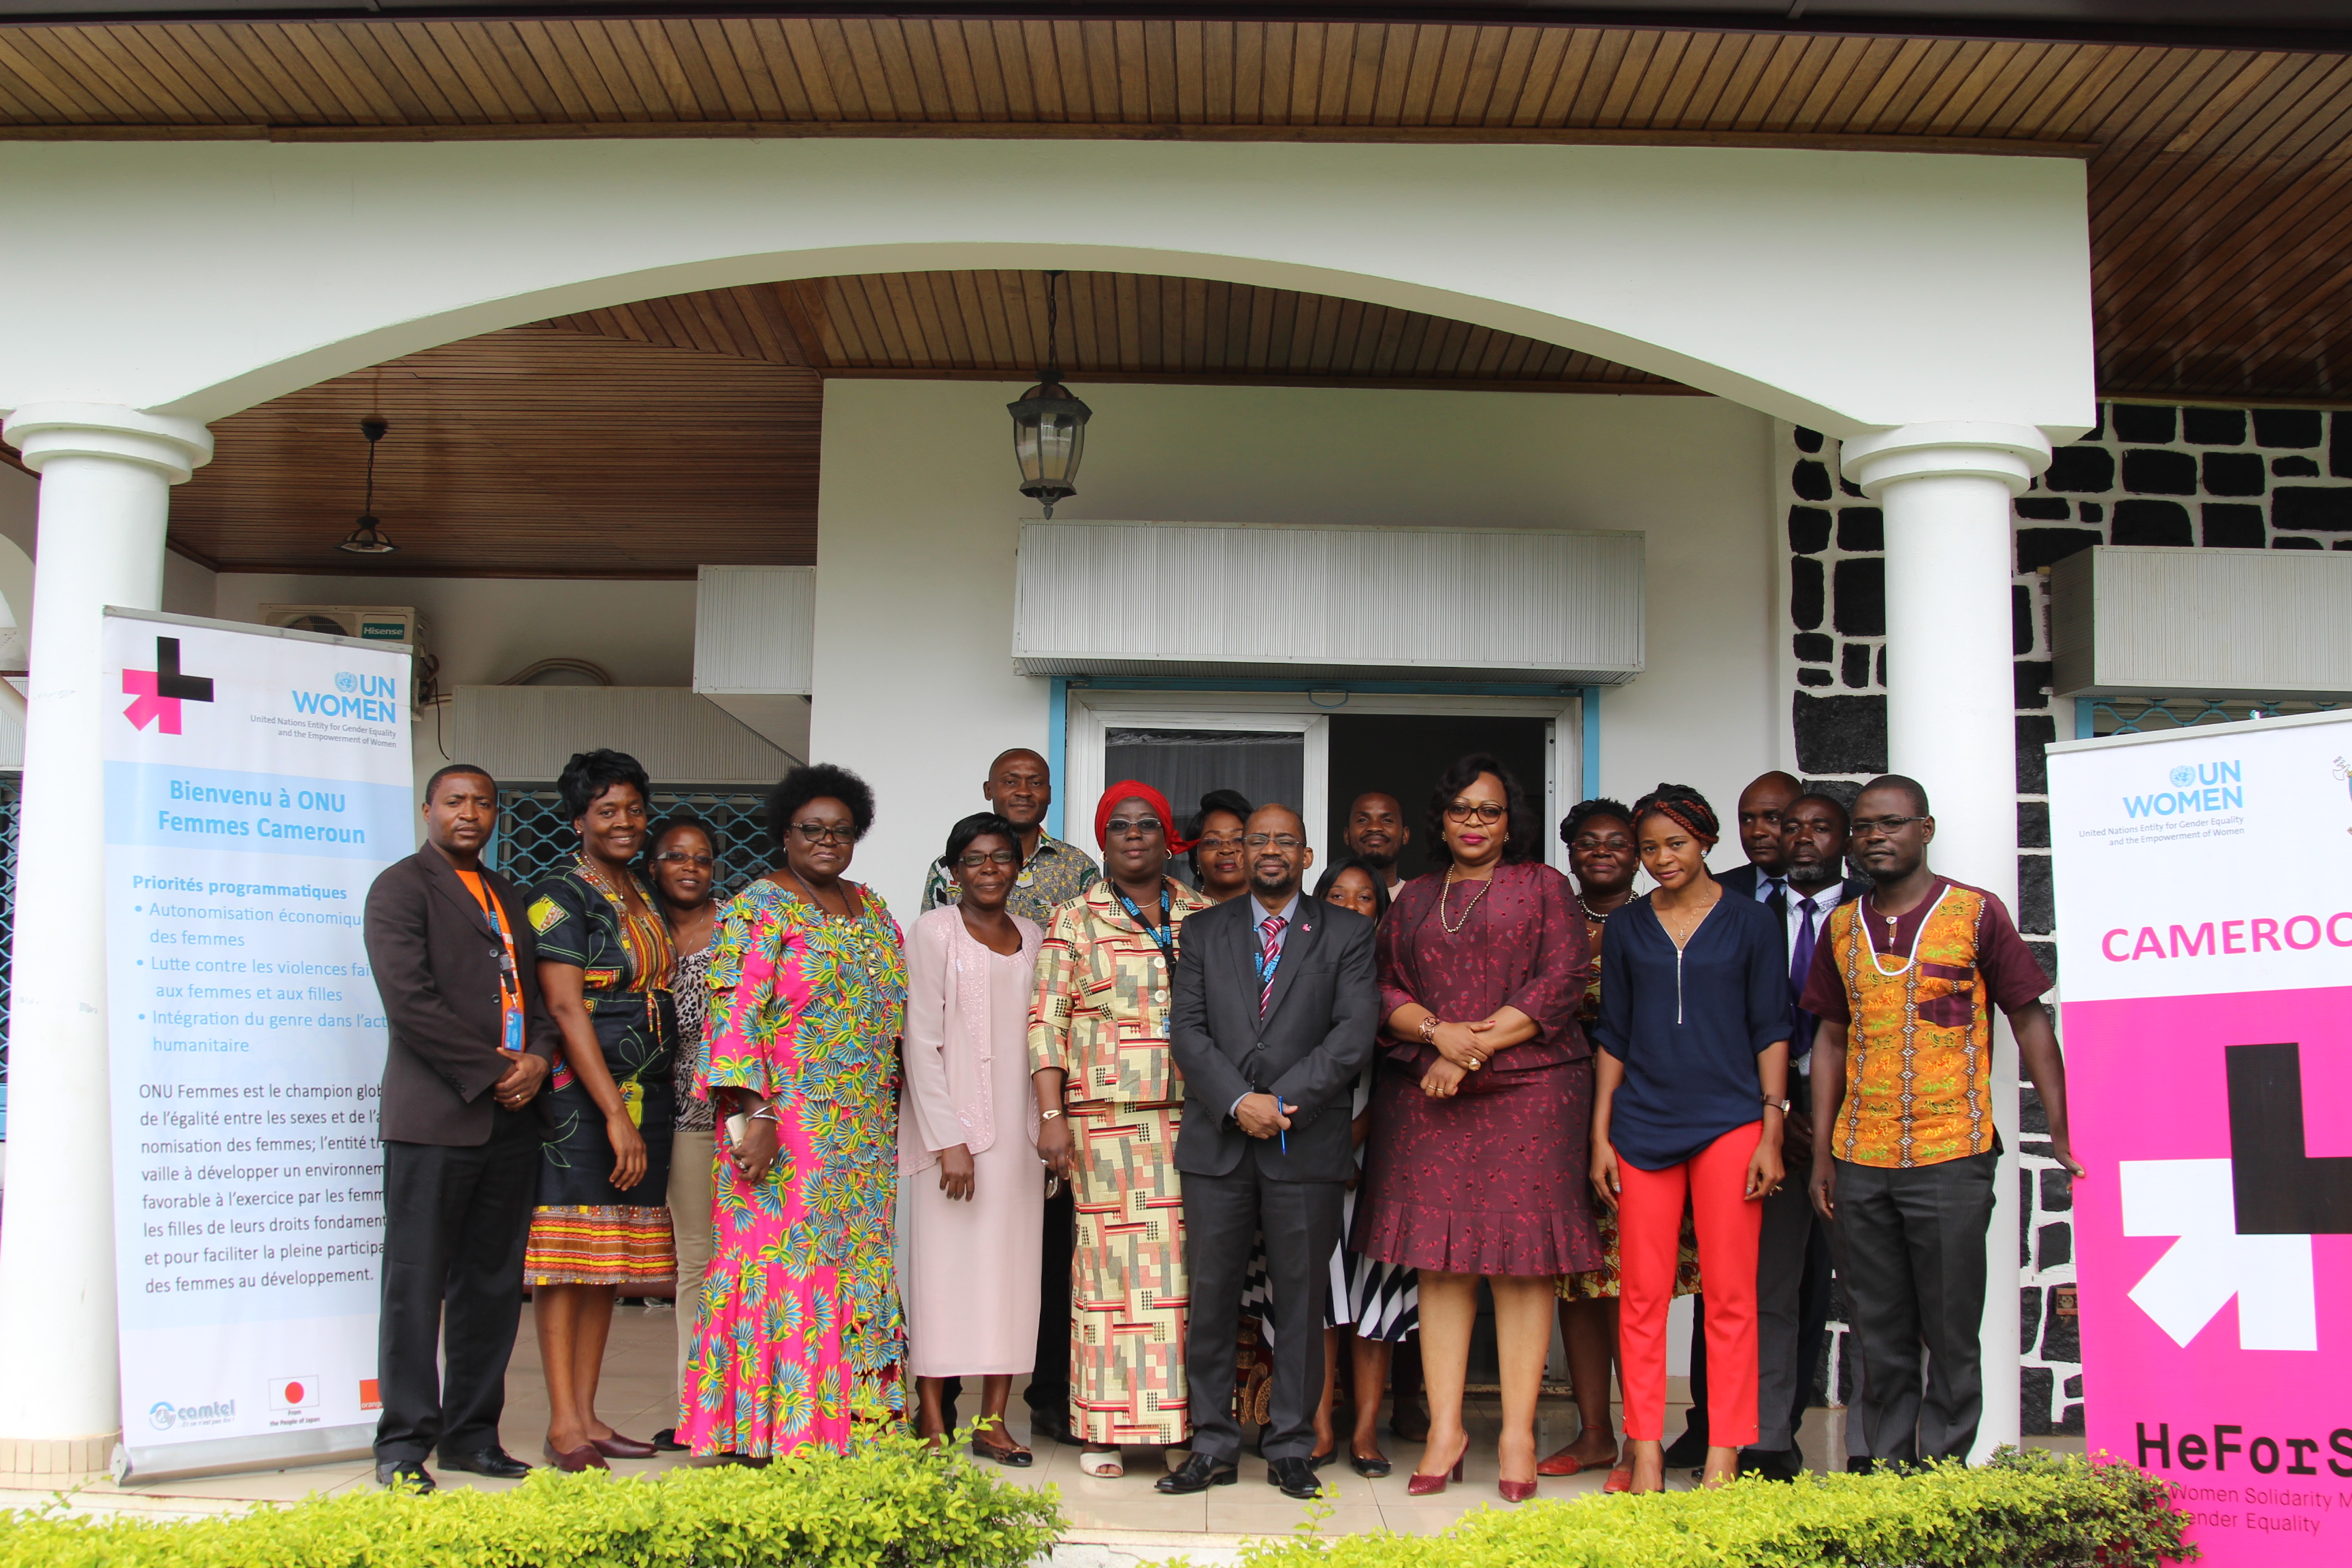 Participants pose for family photo during the sensitization workshop on integrating menstrual hygine management needs of women in ongoing policy reforms organized by UN Women. Photo credit; Teclaire Same, UN Women.